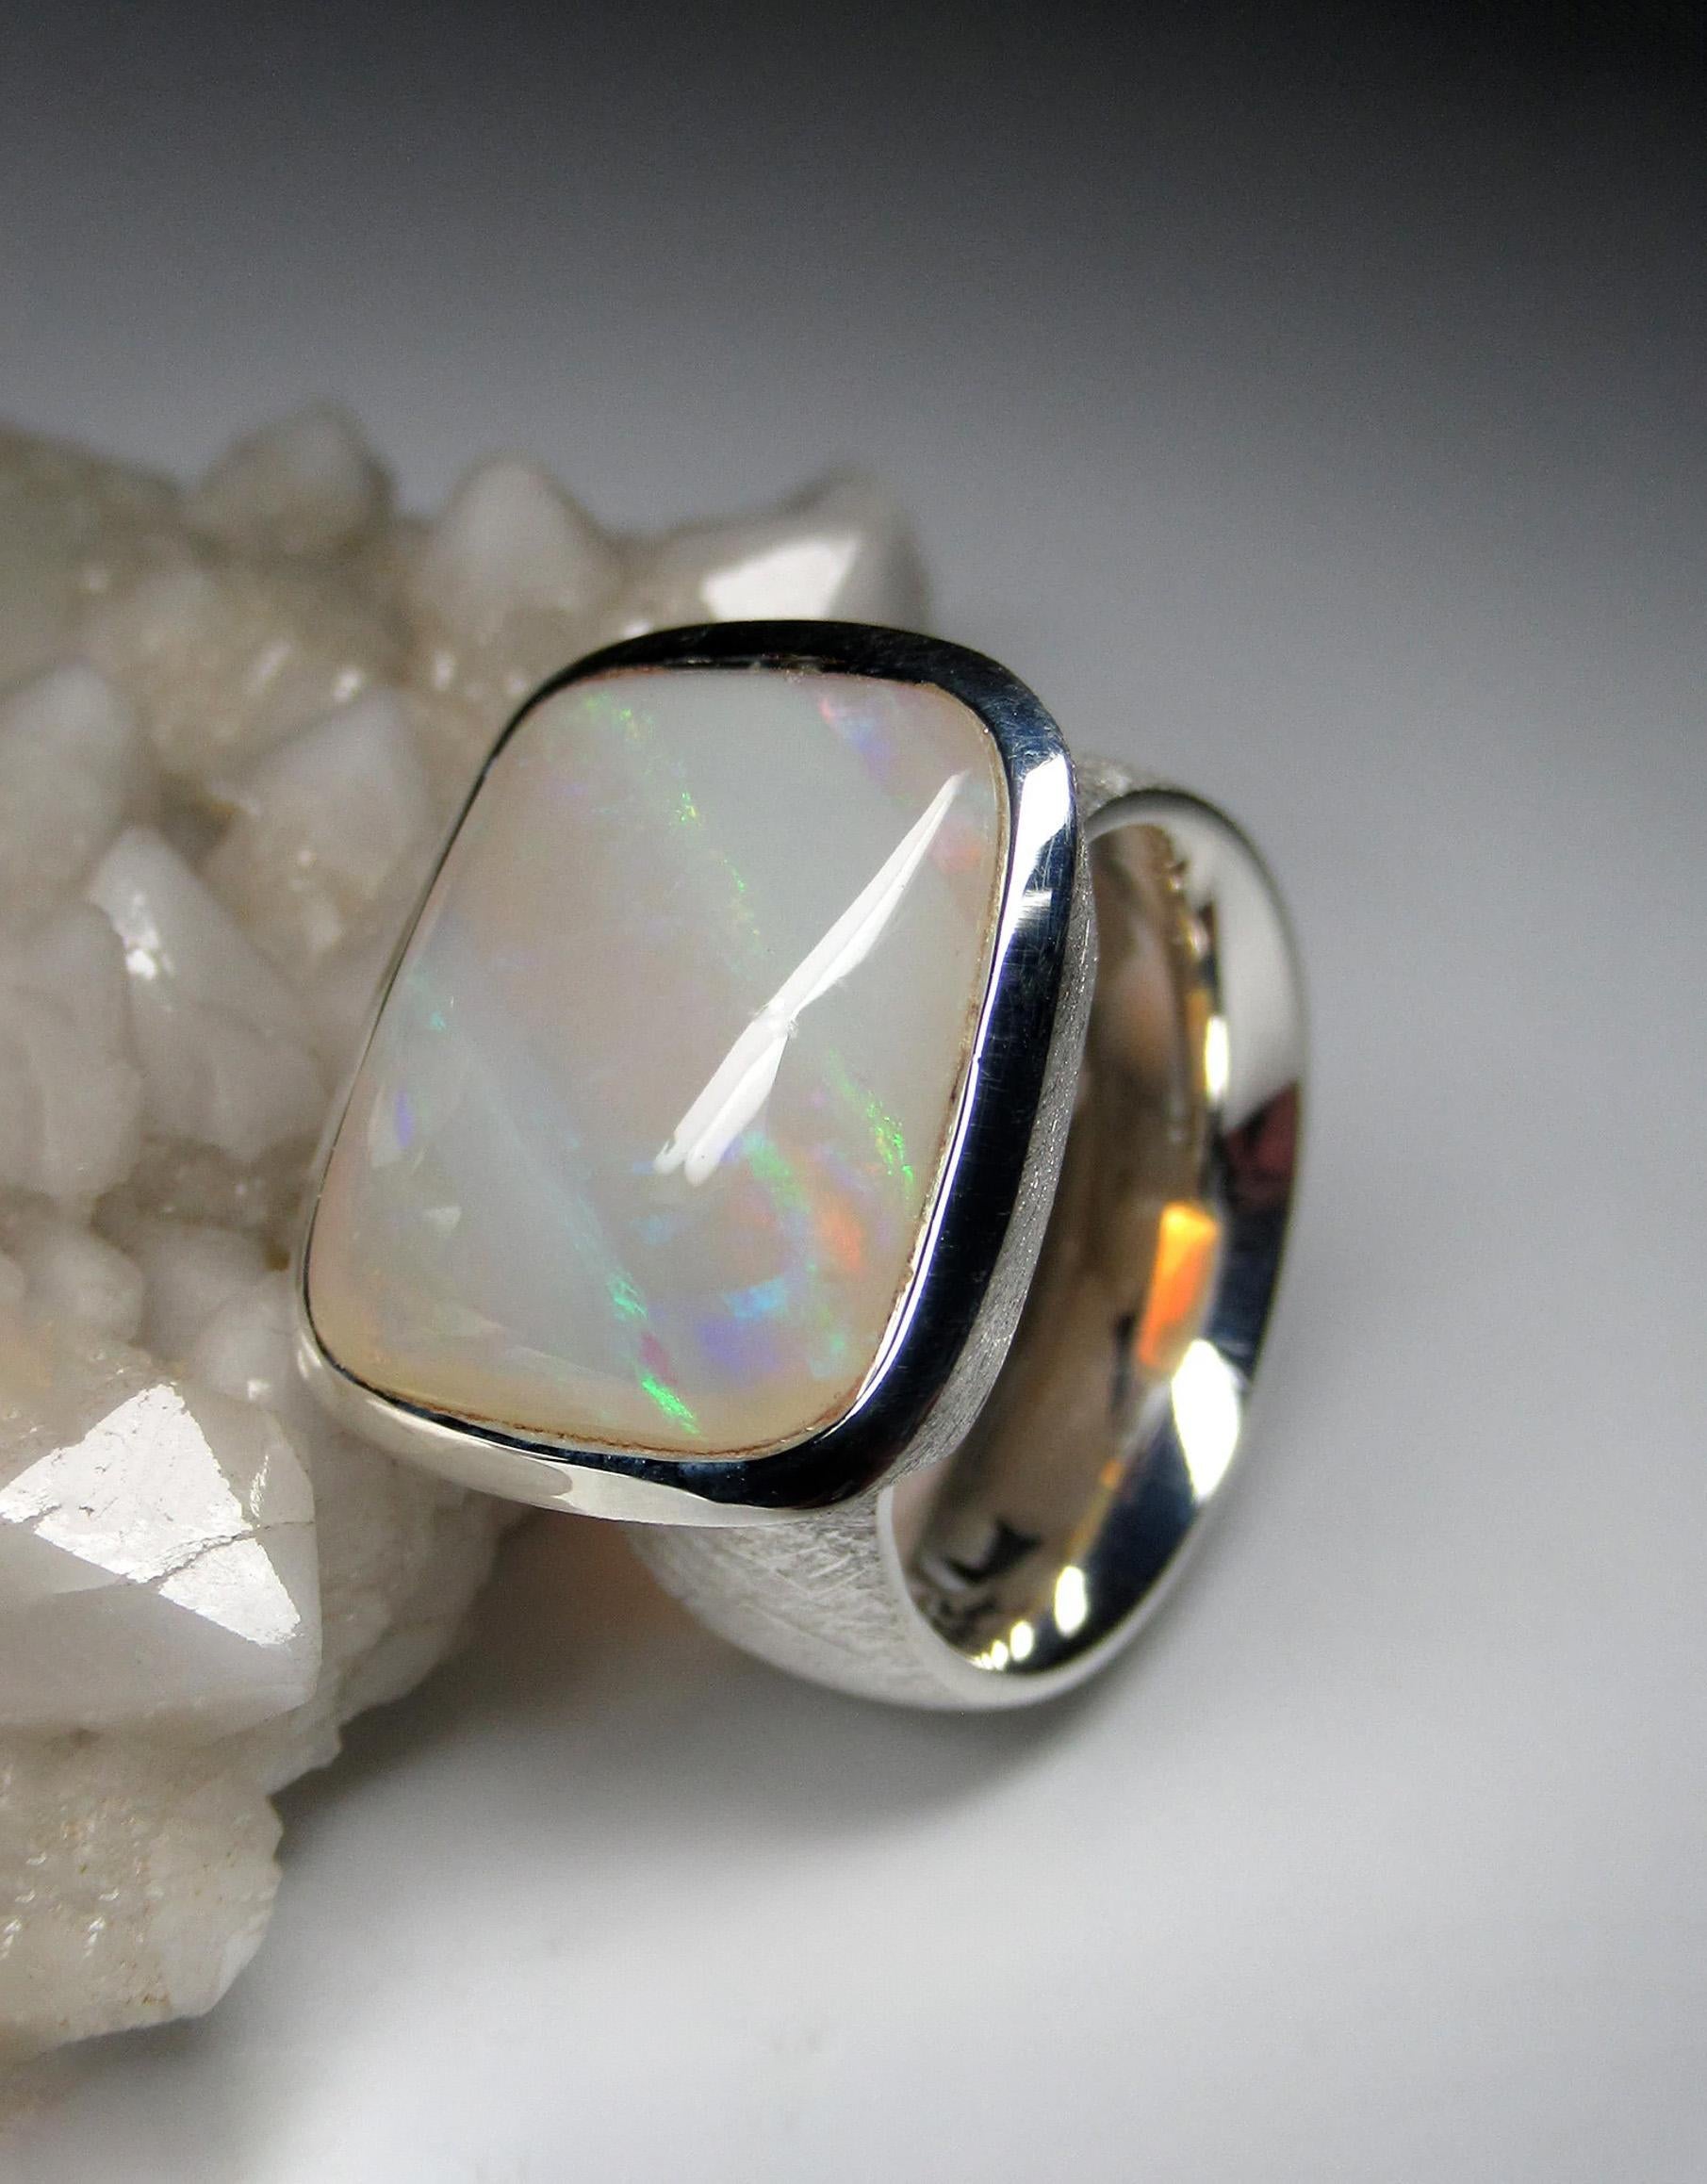 Silver ring with natural Opal 
gemstone origin - Australia
opal measurements - 0.16 x 0.55 x 0.67 in / 4 x 14 x 17 mm
opal weight - 11.13 carats
ring size - 8 1/4 US
ring weight - 13.41 grams